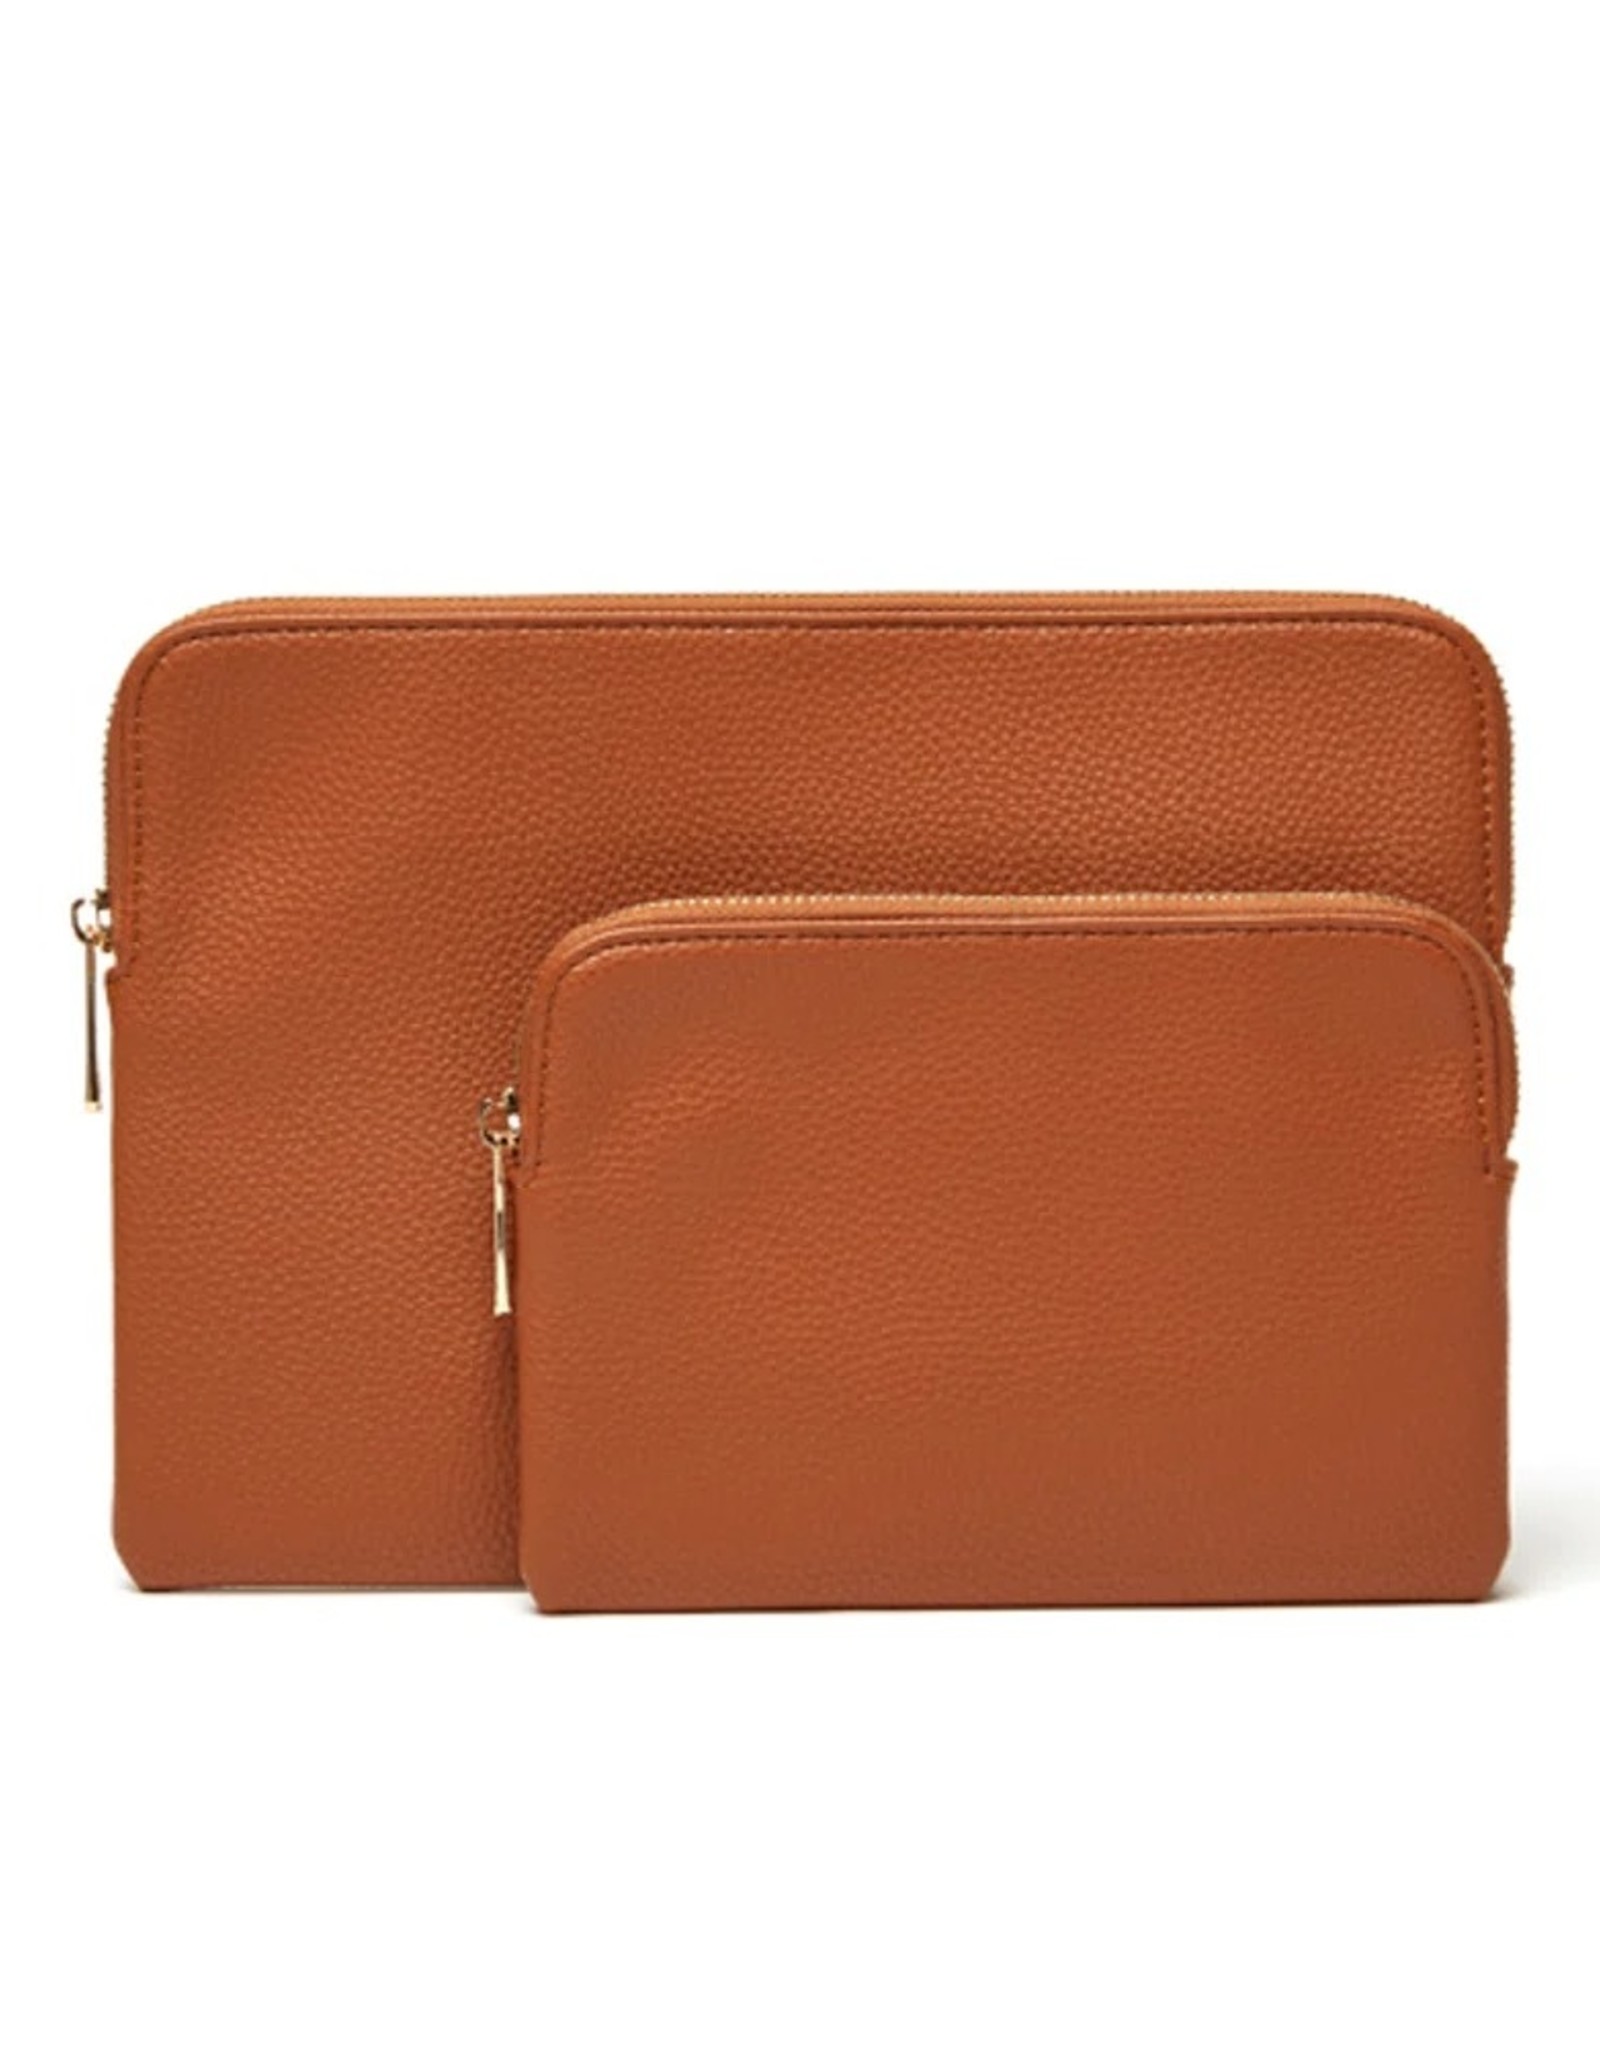 Brouk and Co. Mia 2 Piece Pouch